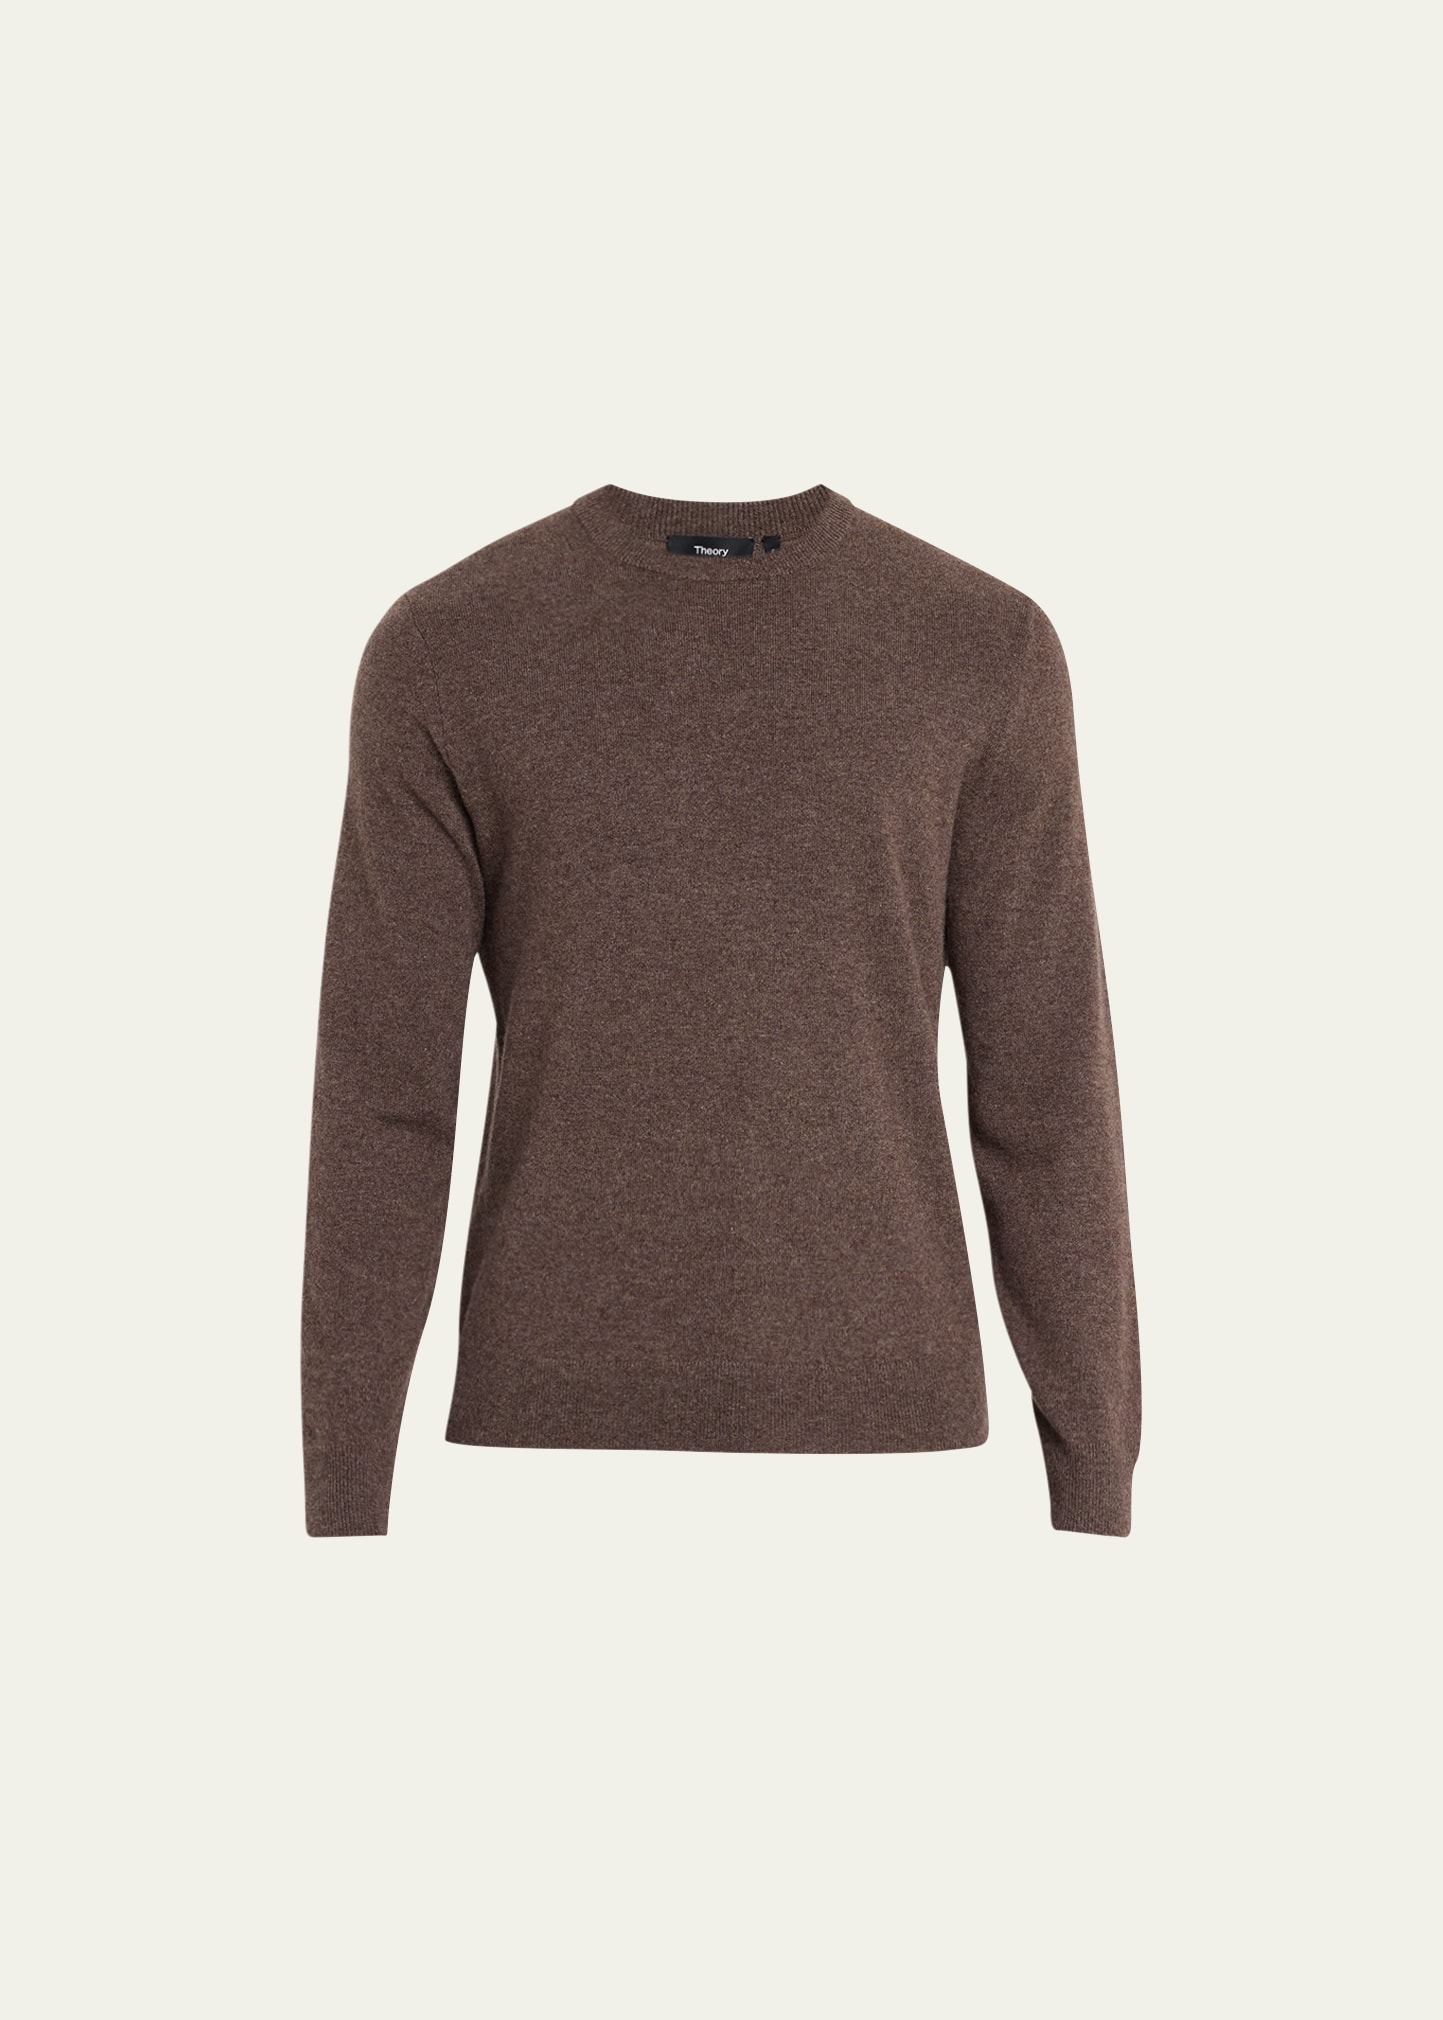 Men's Hilles Sweater in Cashmere